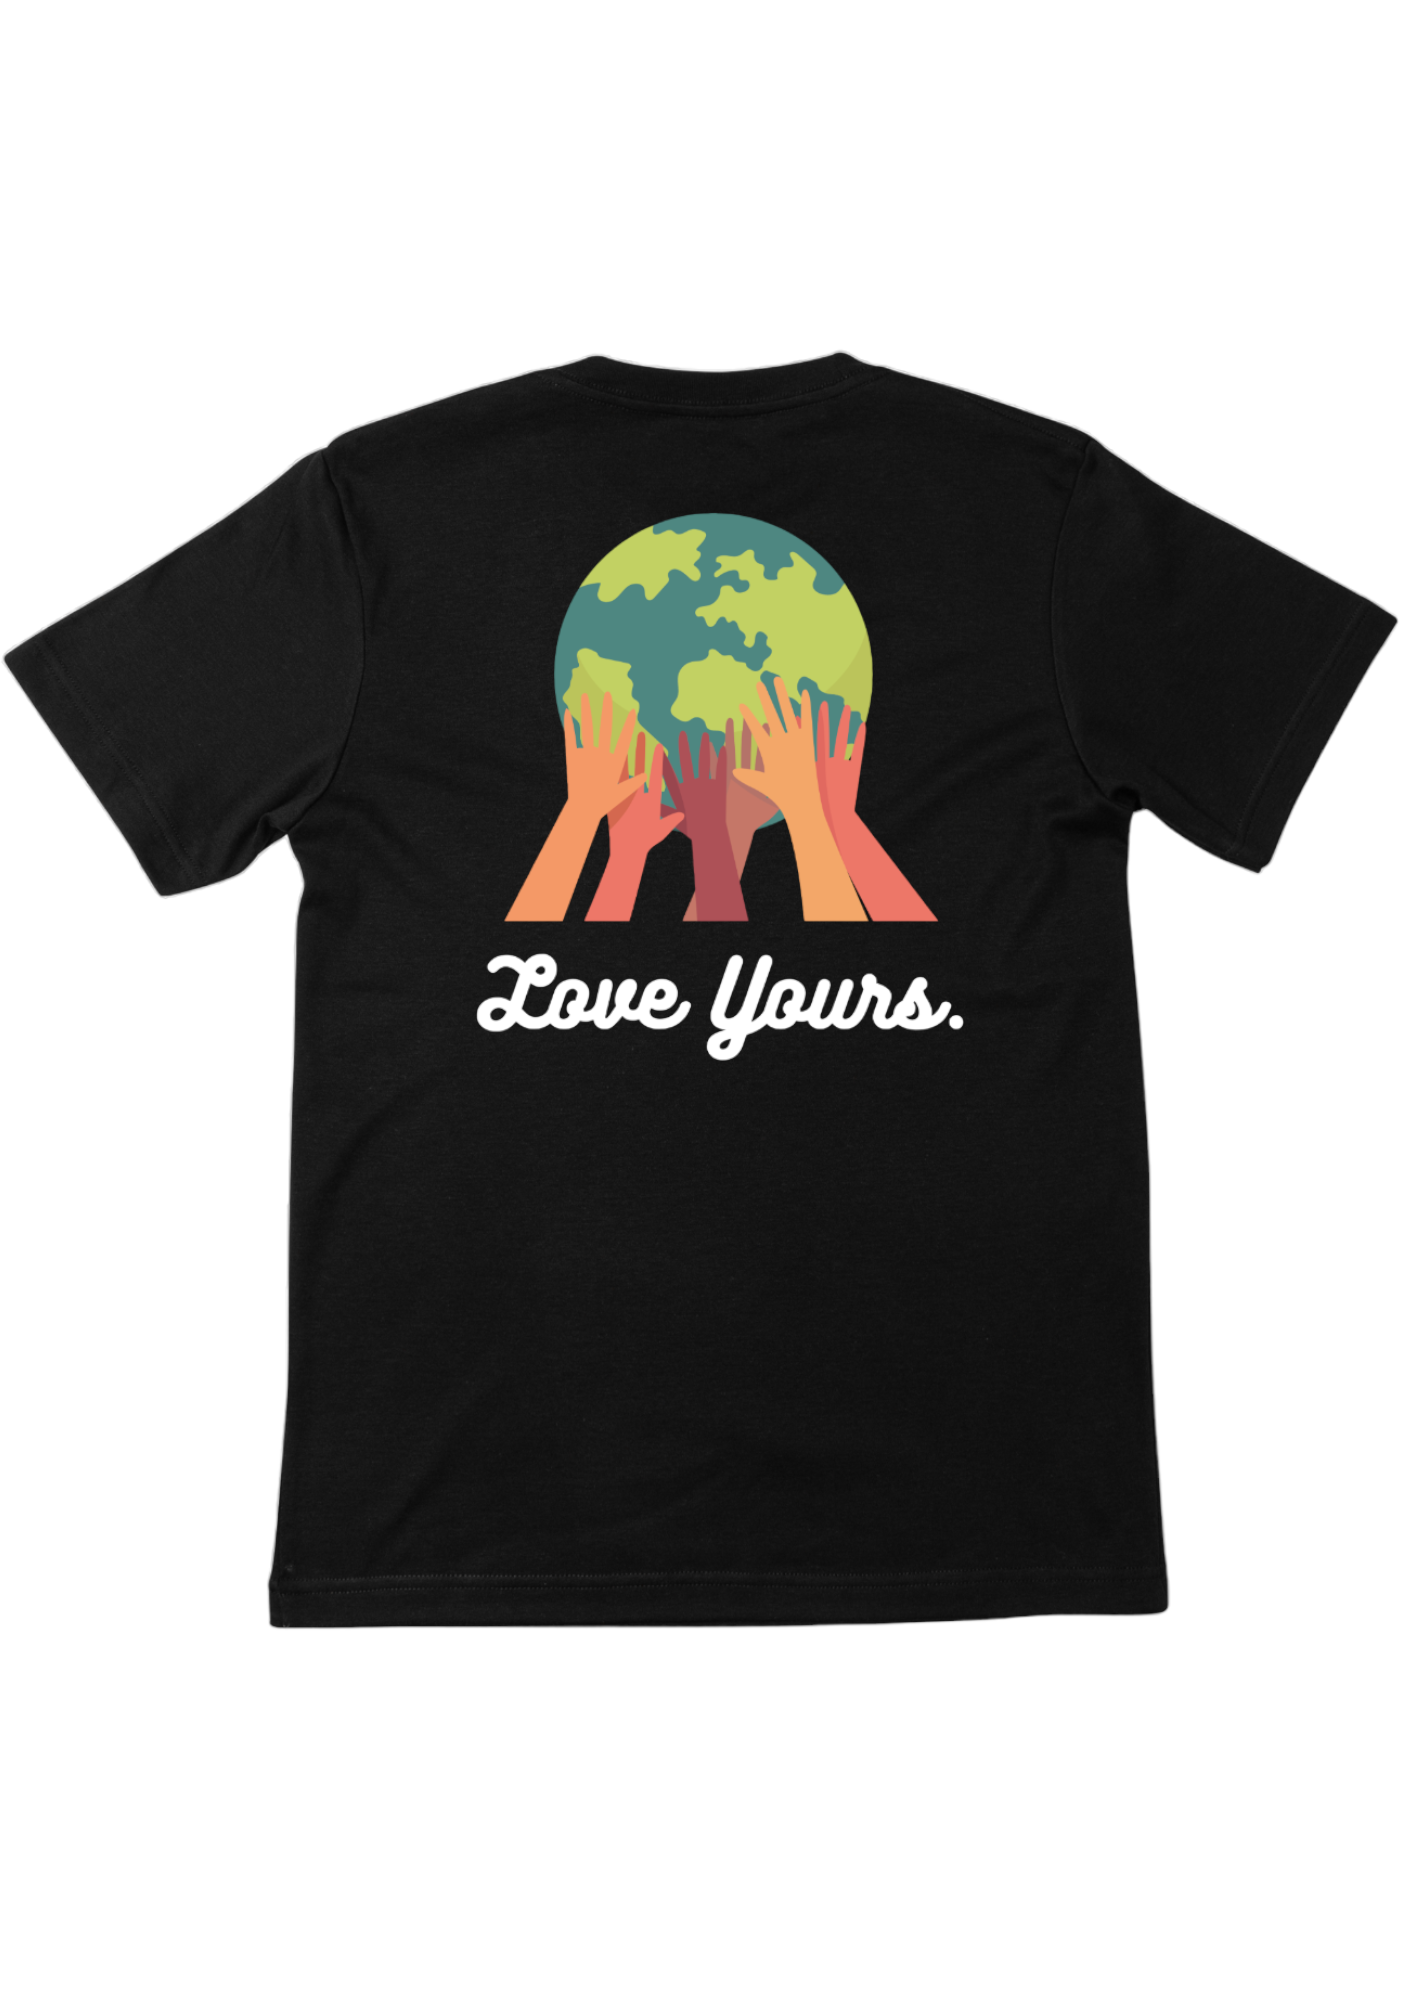 By Any Meanz Love Yours Black T-shirt 